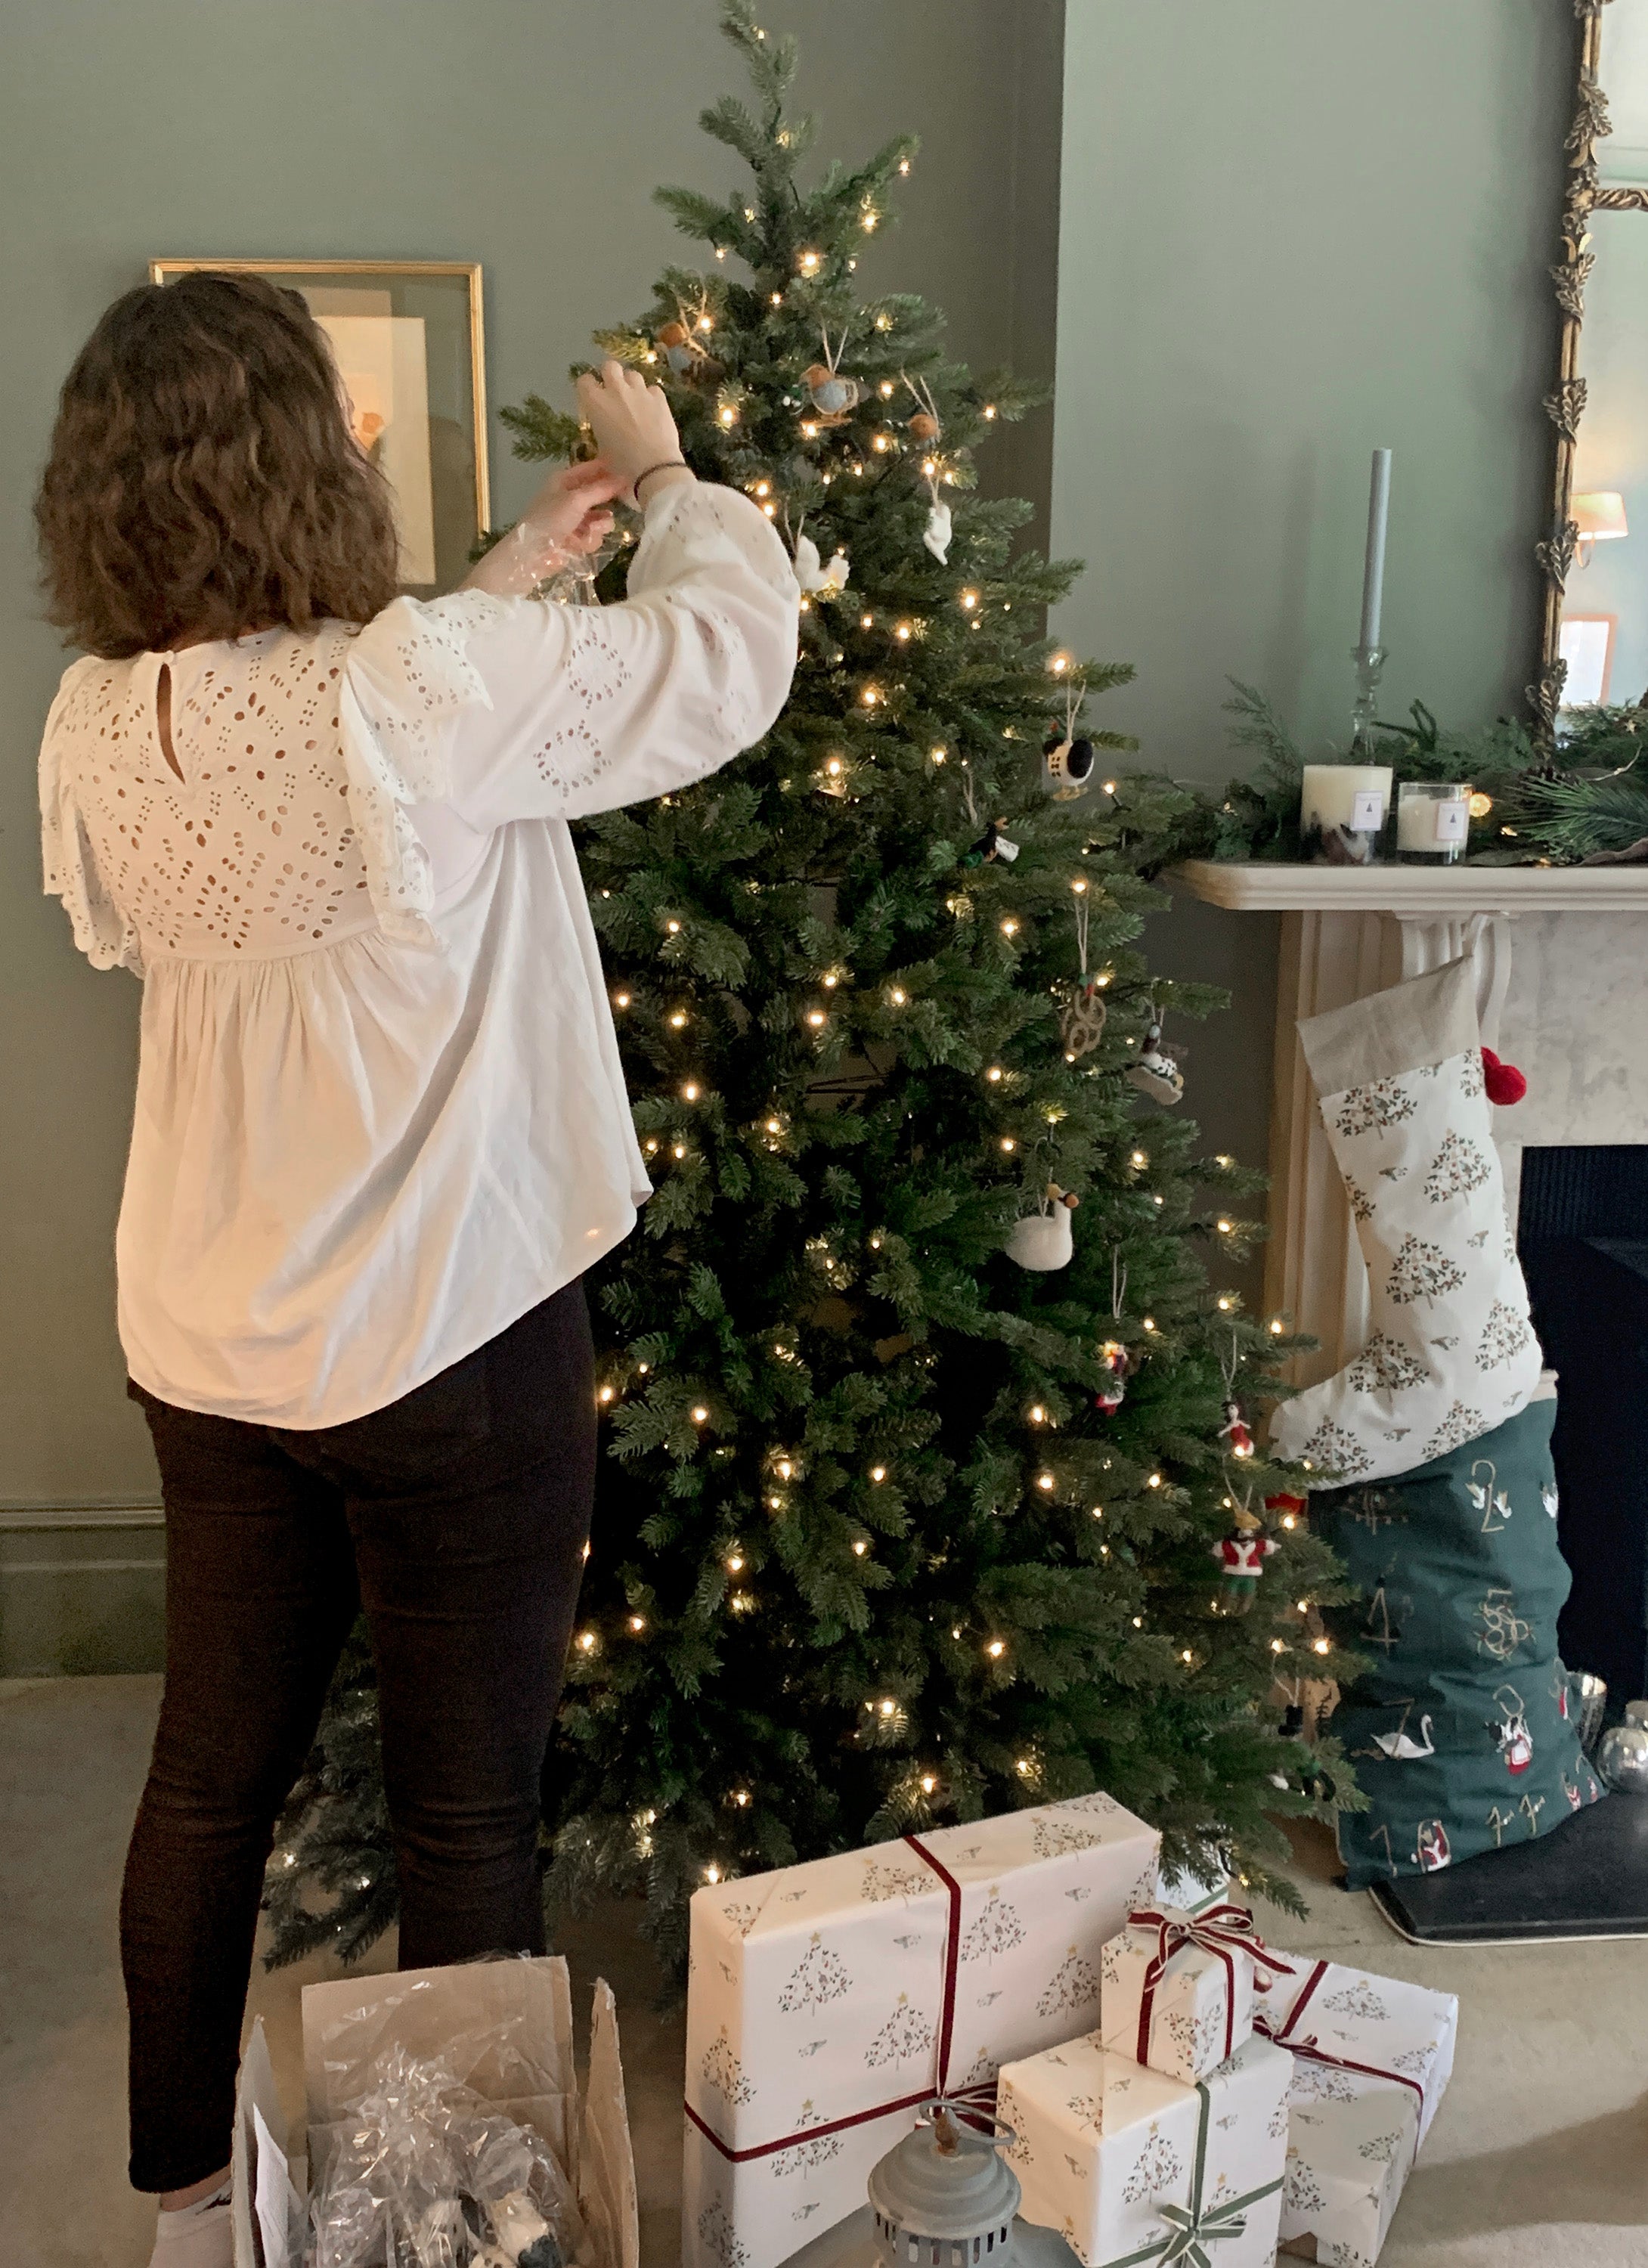 Photoshoot new Christmas collection by Sophie Allport